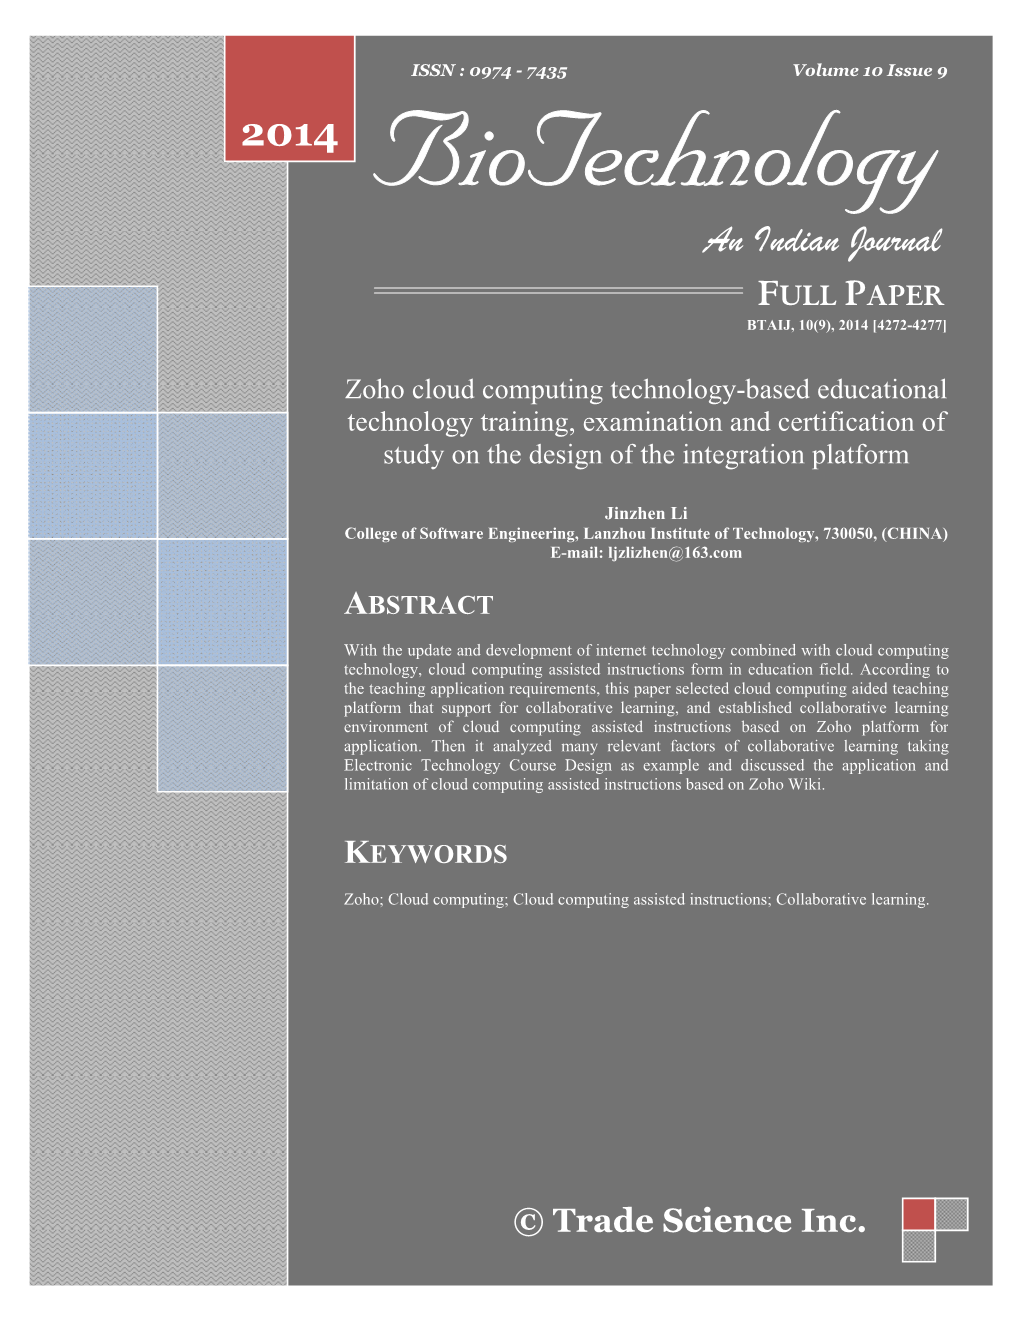 Zoho Cloud Computing Technology-Based Educational Technology Training, Examination and Certification of Study on the Design of the Integration Platform